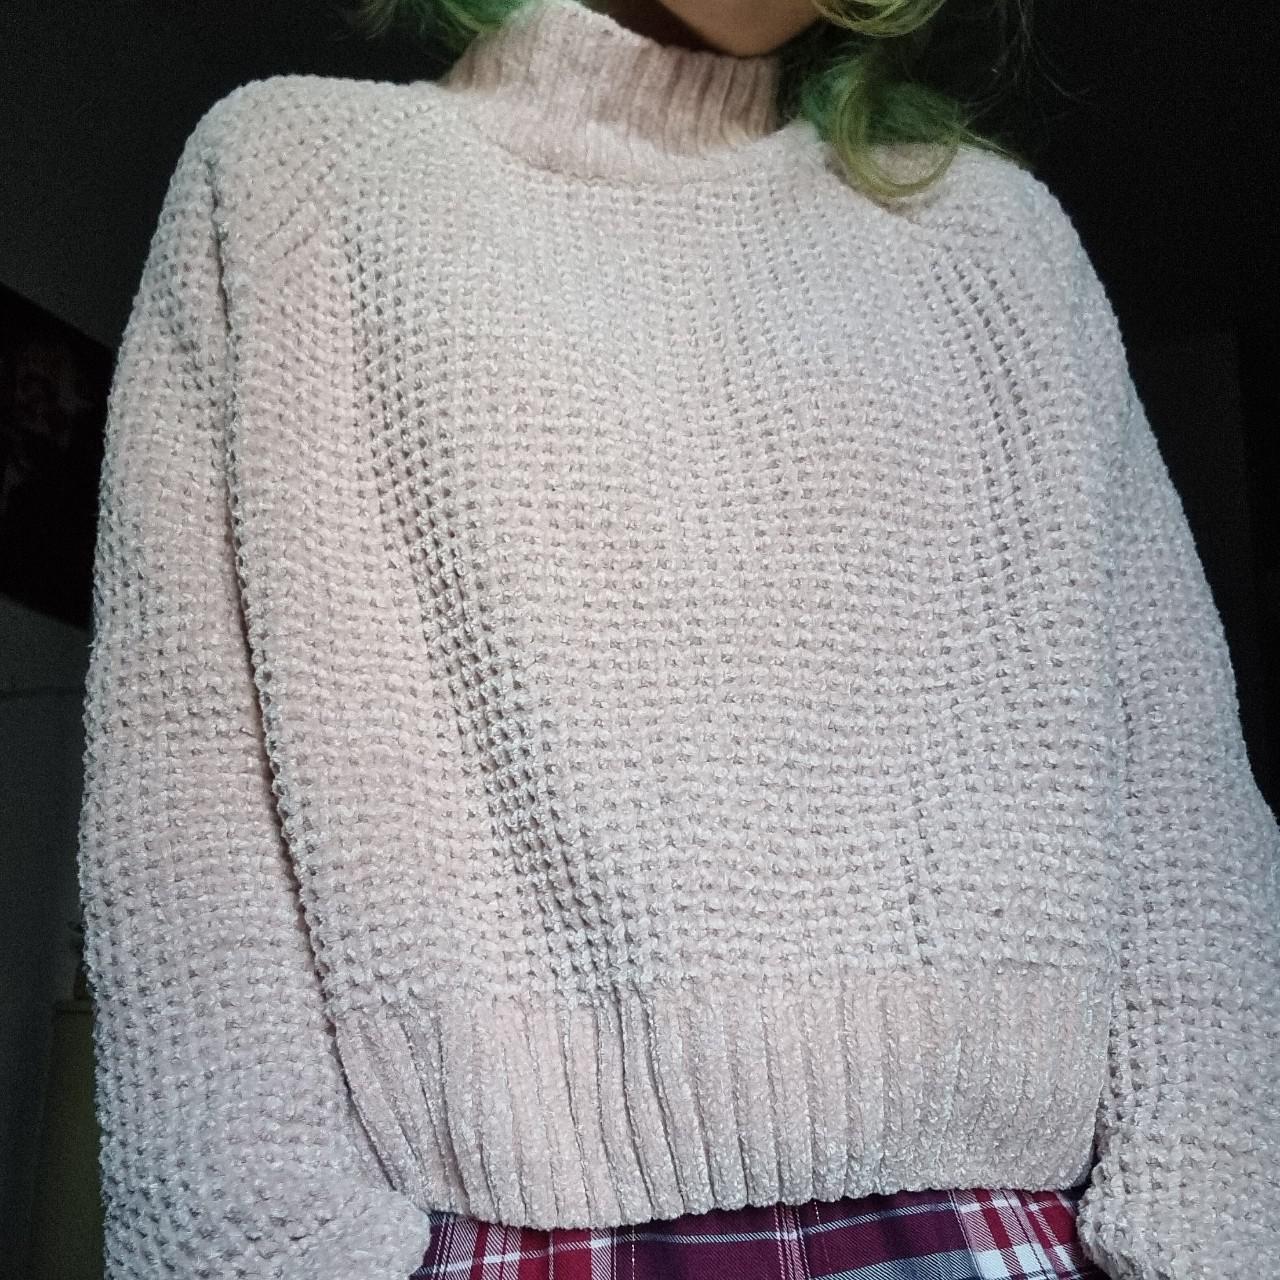 Product Image 3 - Chunky Knit pink sweater/jumper

From H&M

#chunky